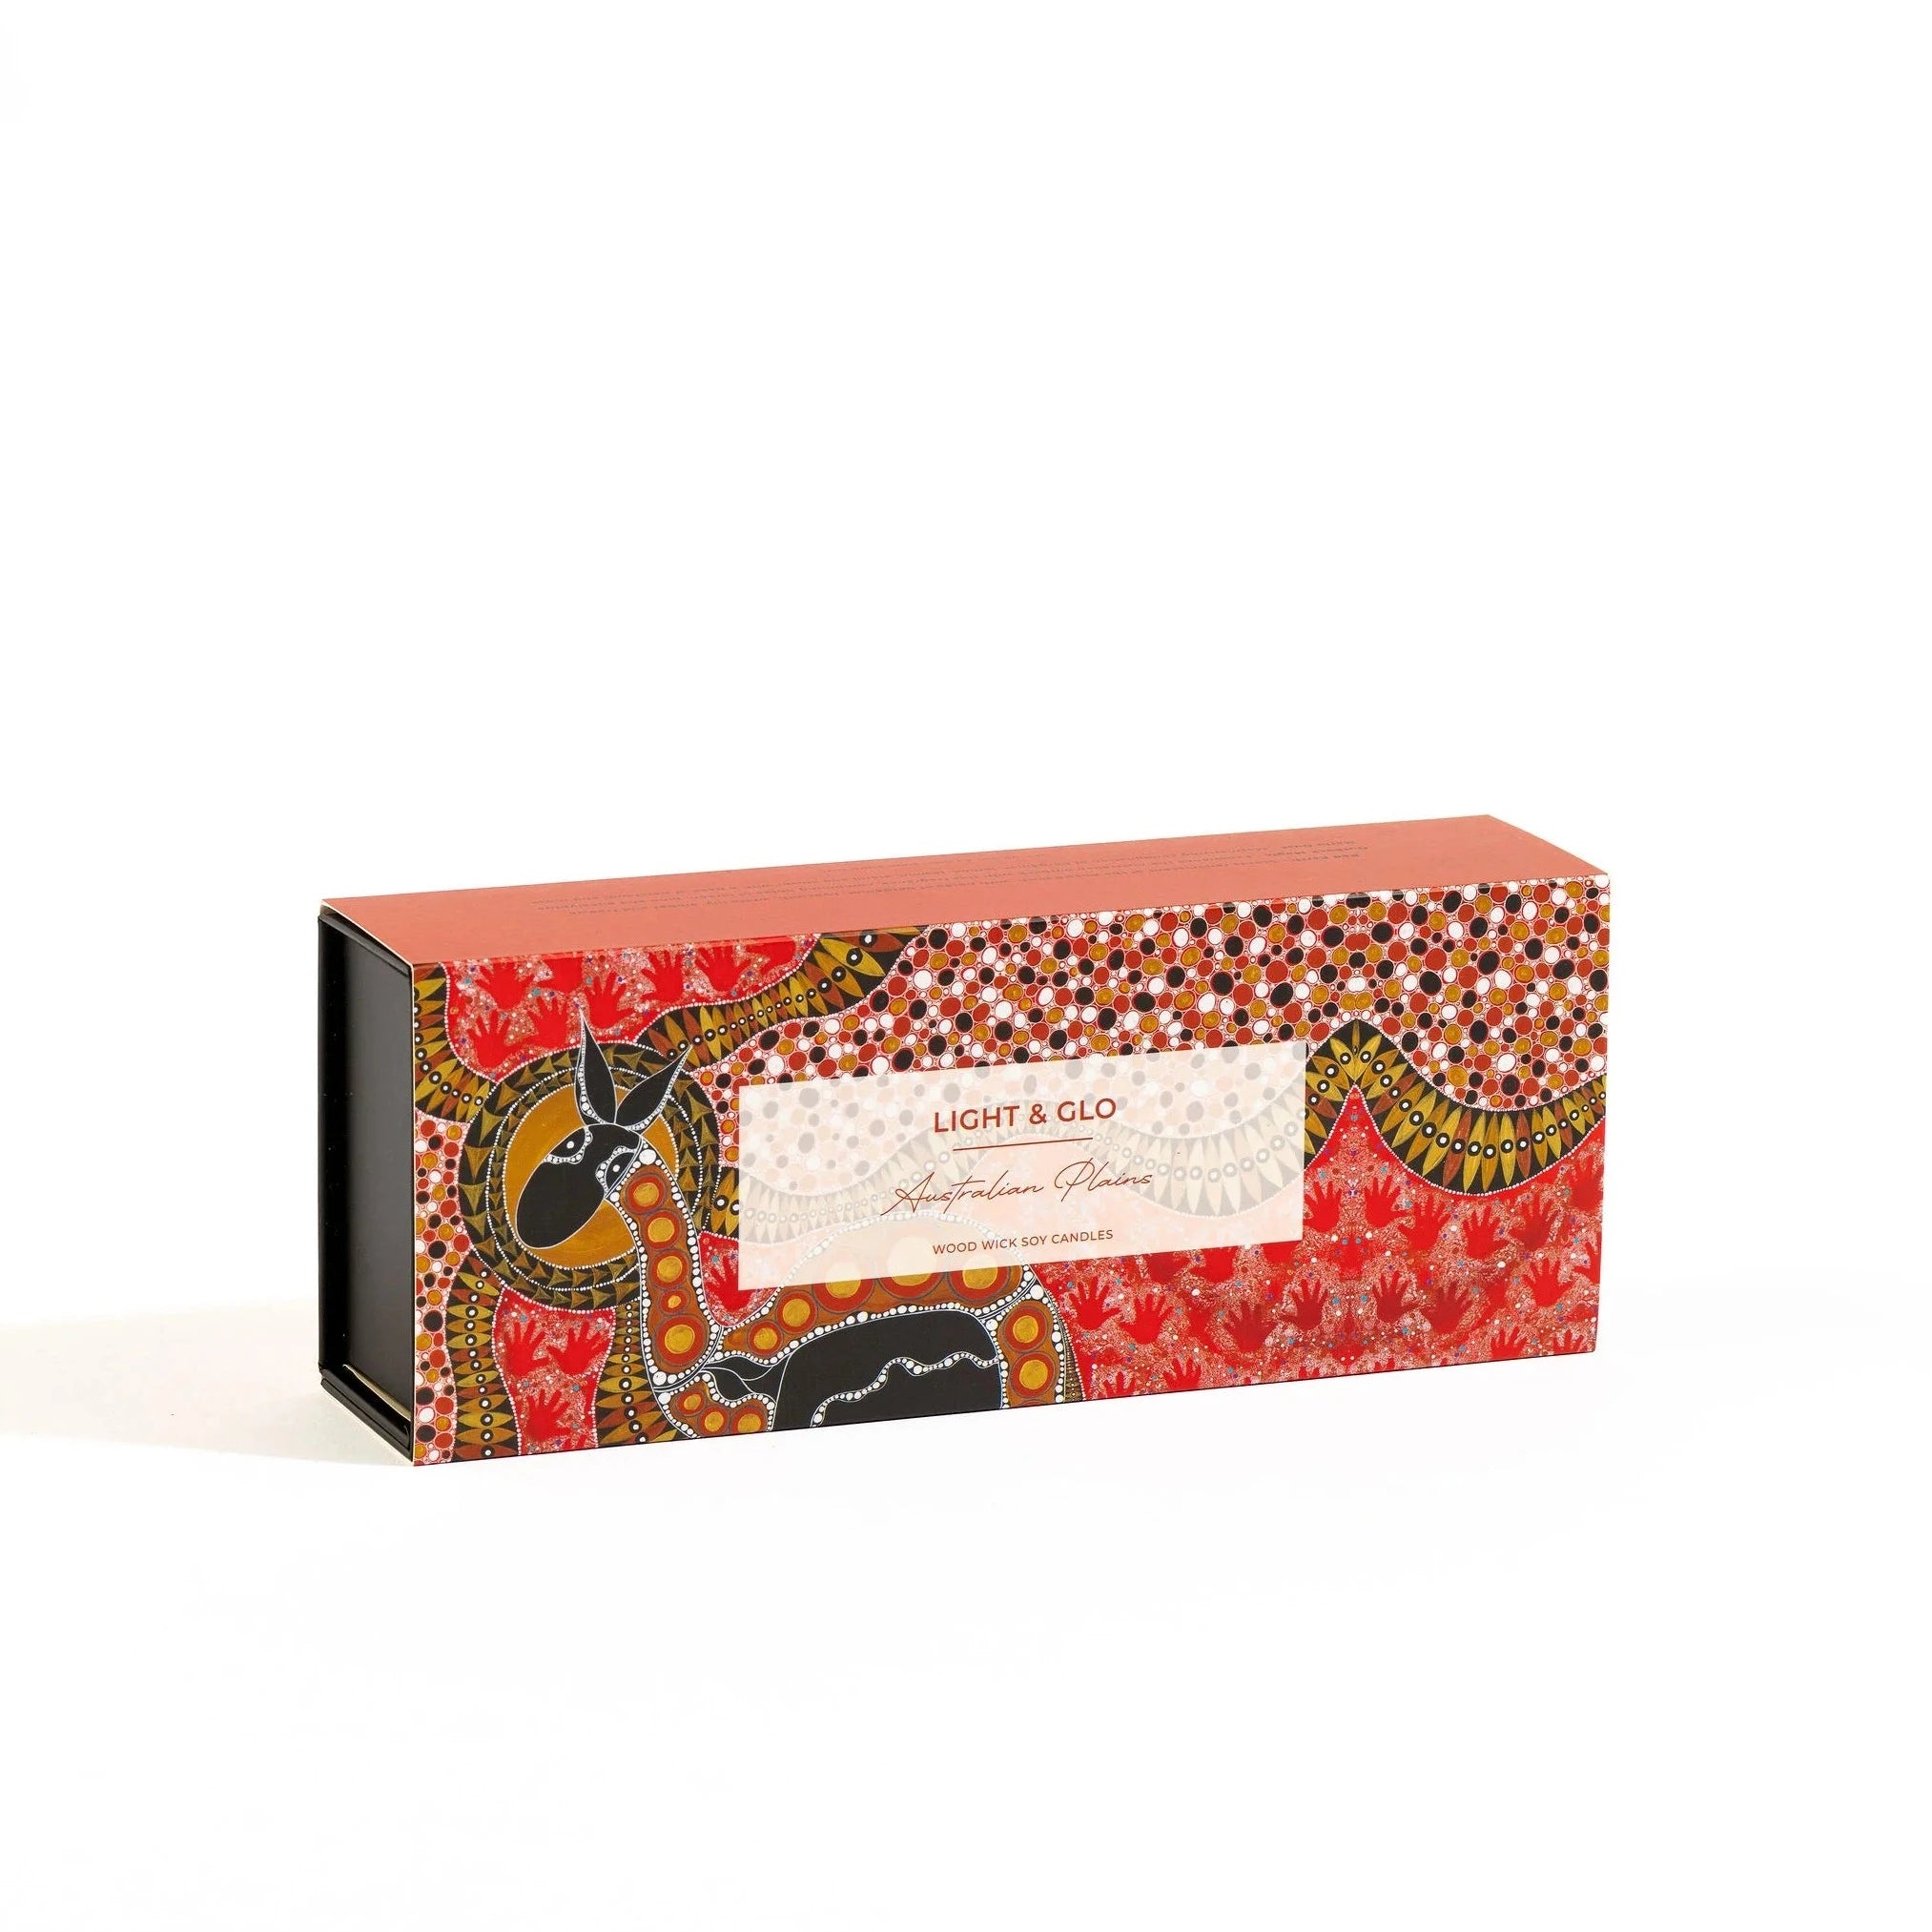 Light and Glo Australian Plains Candle Trio in  gift box with aboriginal designs.